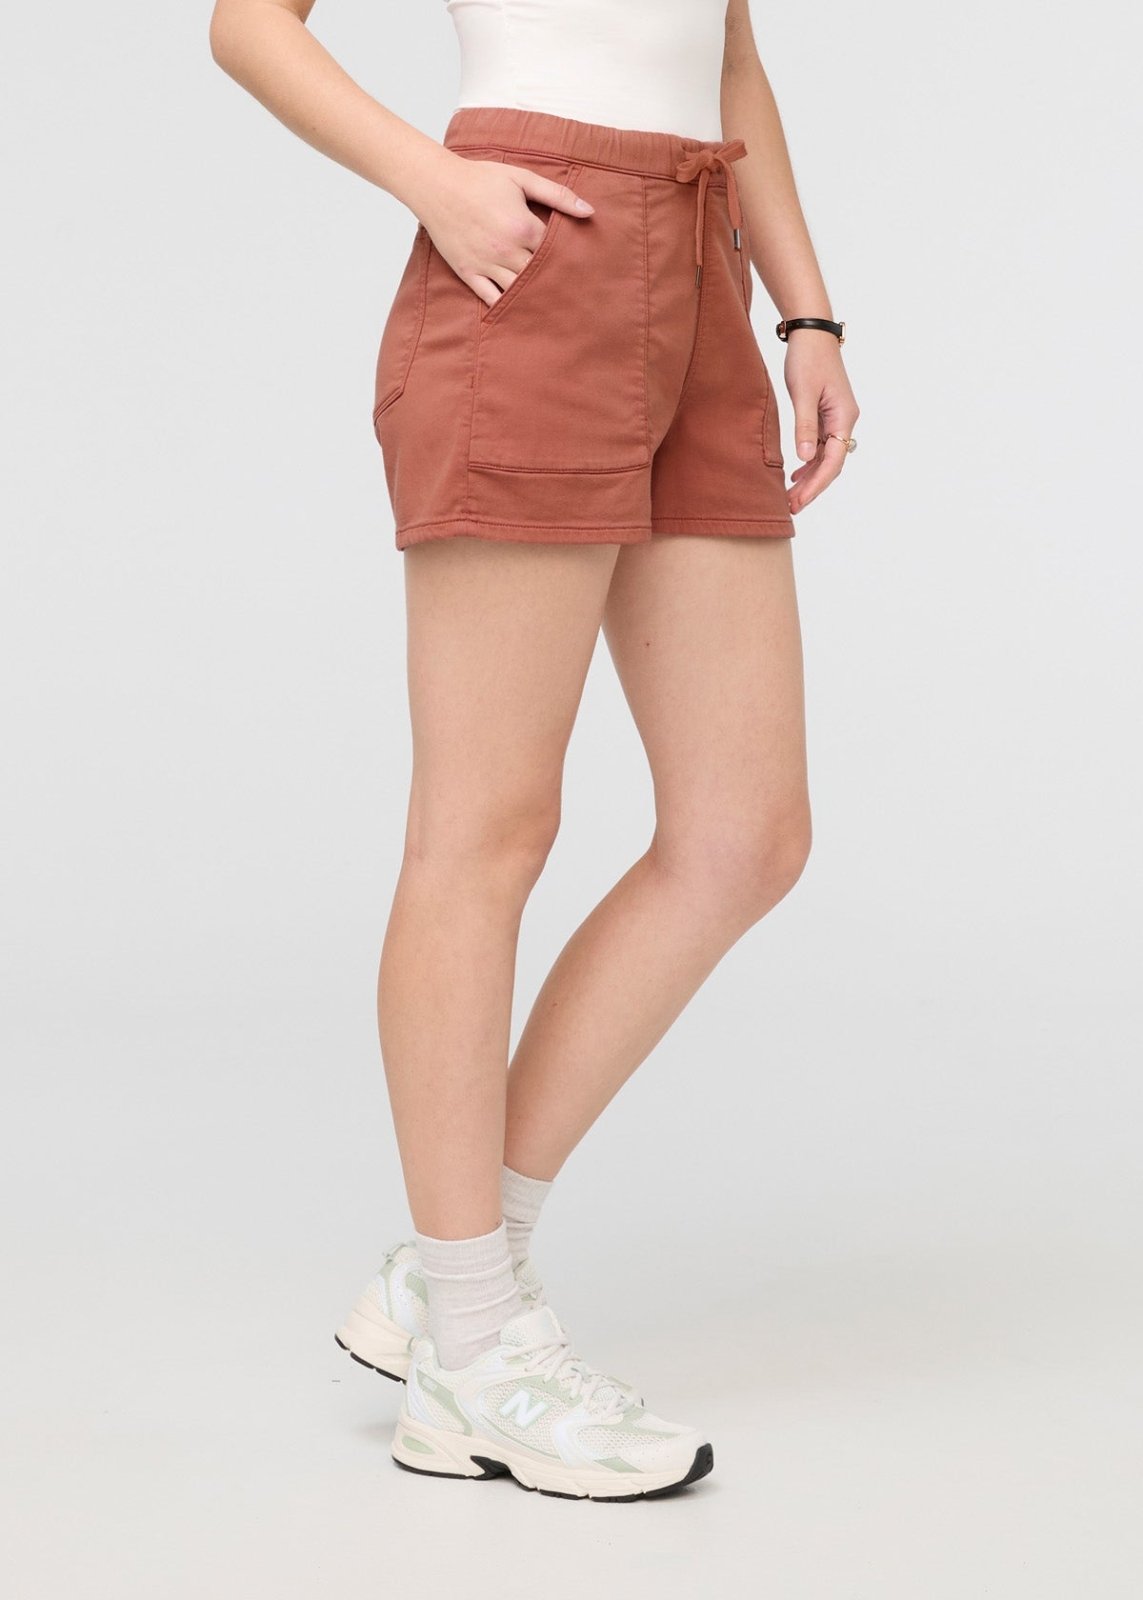 womens red pull on drawstring shorts side